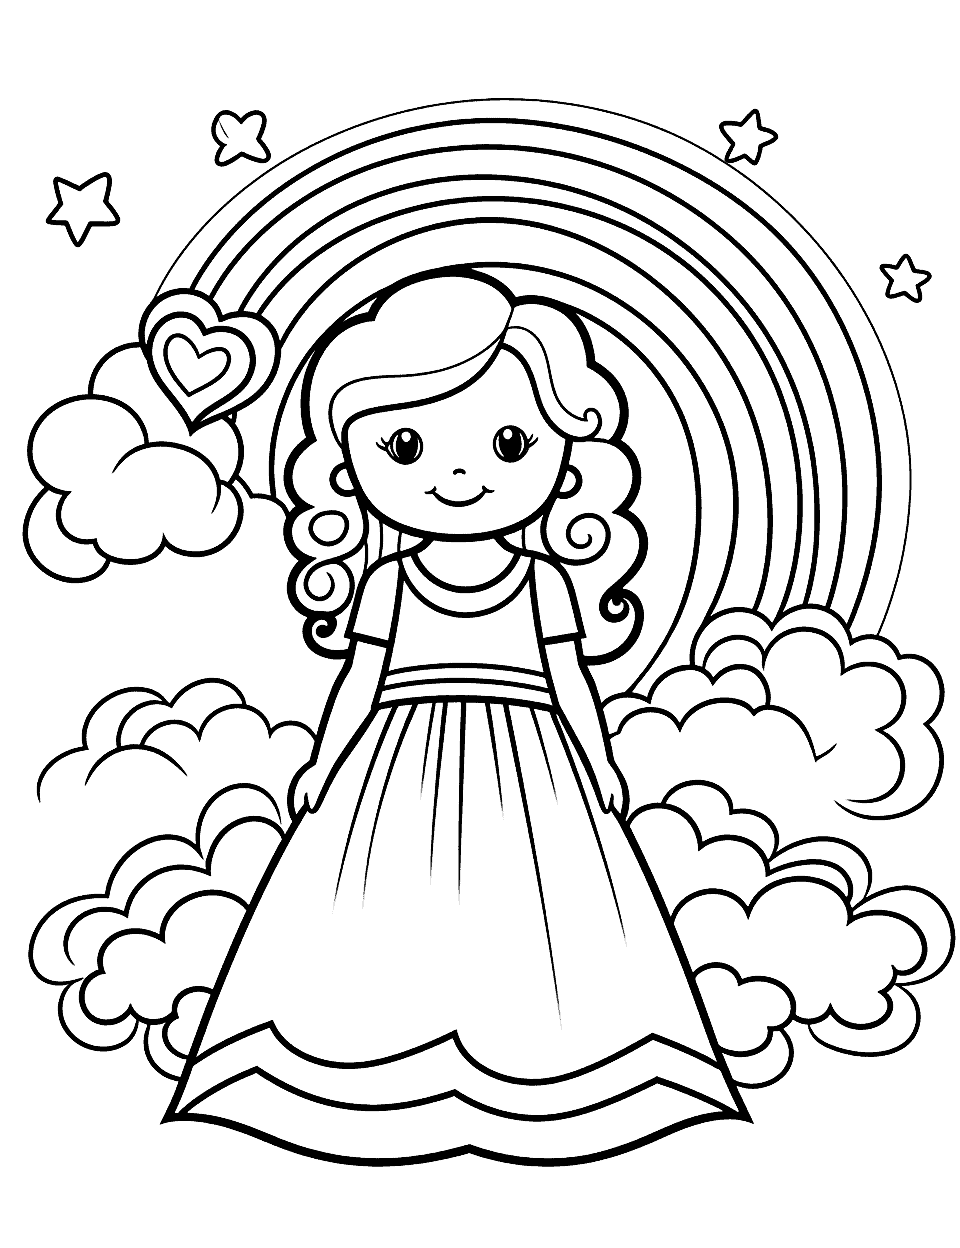 Rainbow Princess Coloring Page - A princess wearing a dress with rainbow-colored layers.